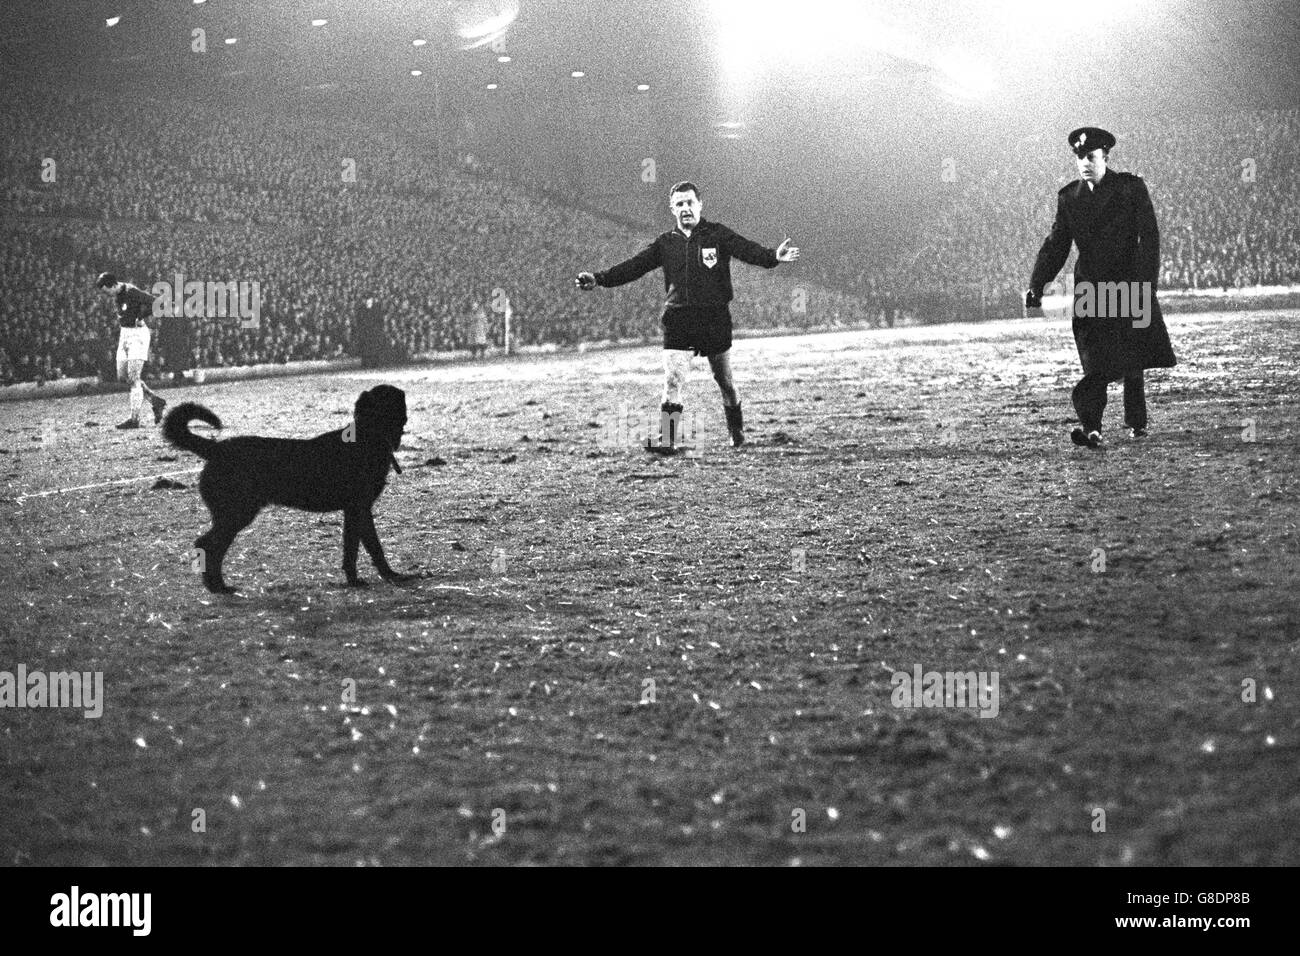 Referee G Schaulenberg and a police officer approach a dog that was holding up play in the Inter-Cities Fairs match between Leeds United and Ujpest Dozsa at Elland Road in Leeds. Stock Photo